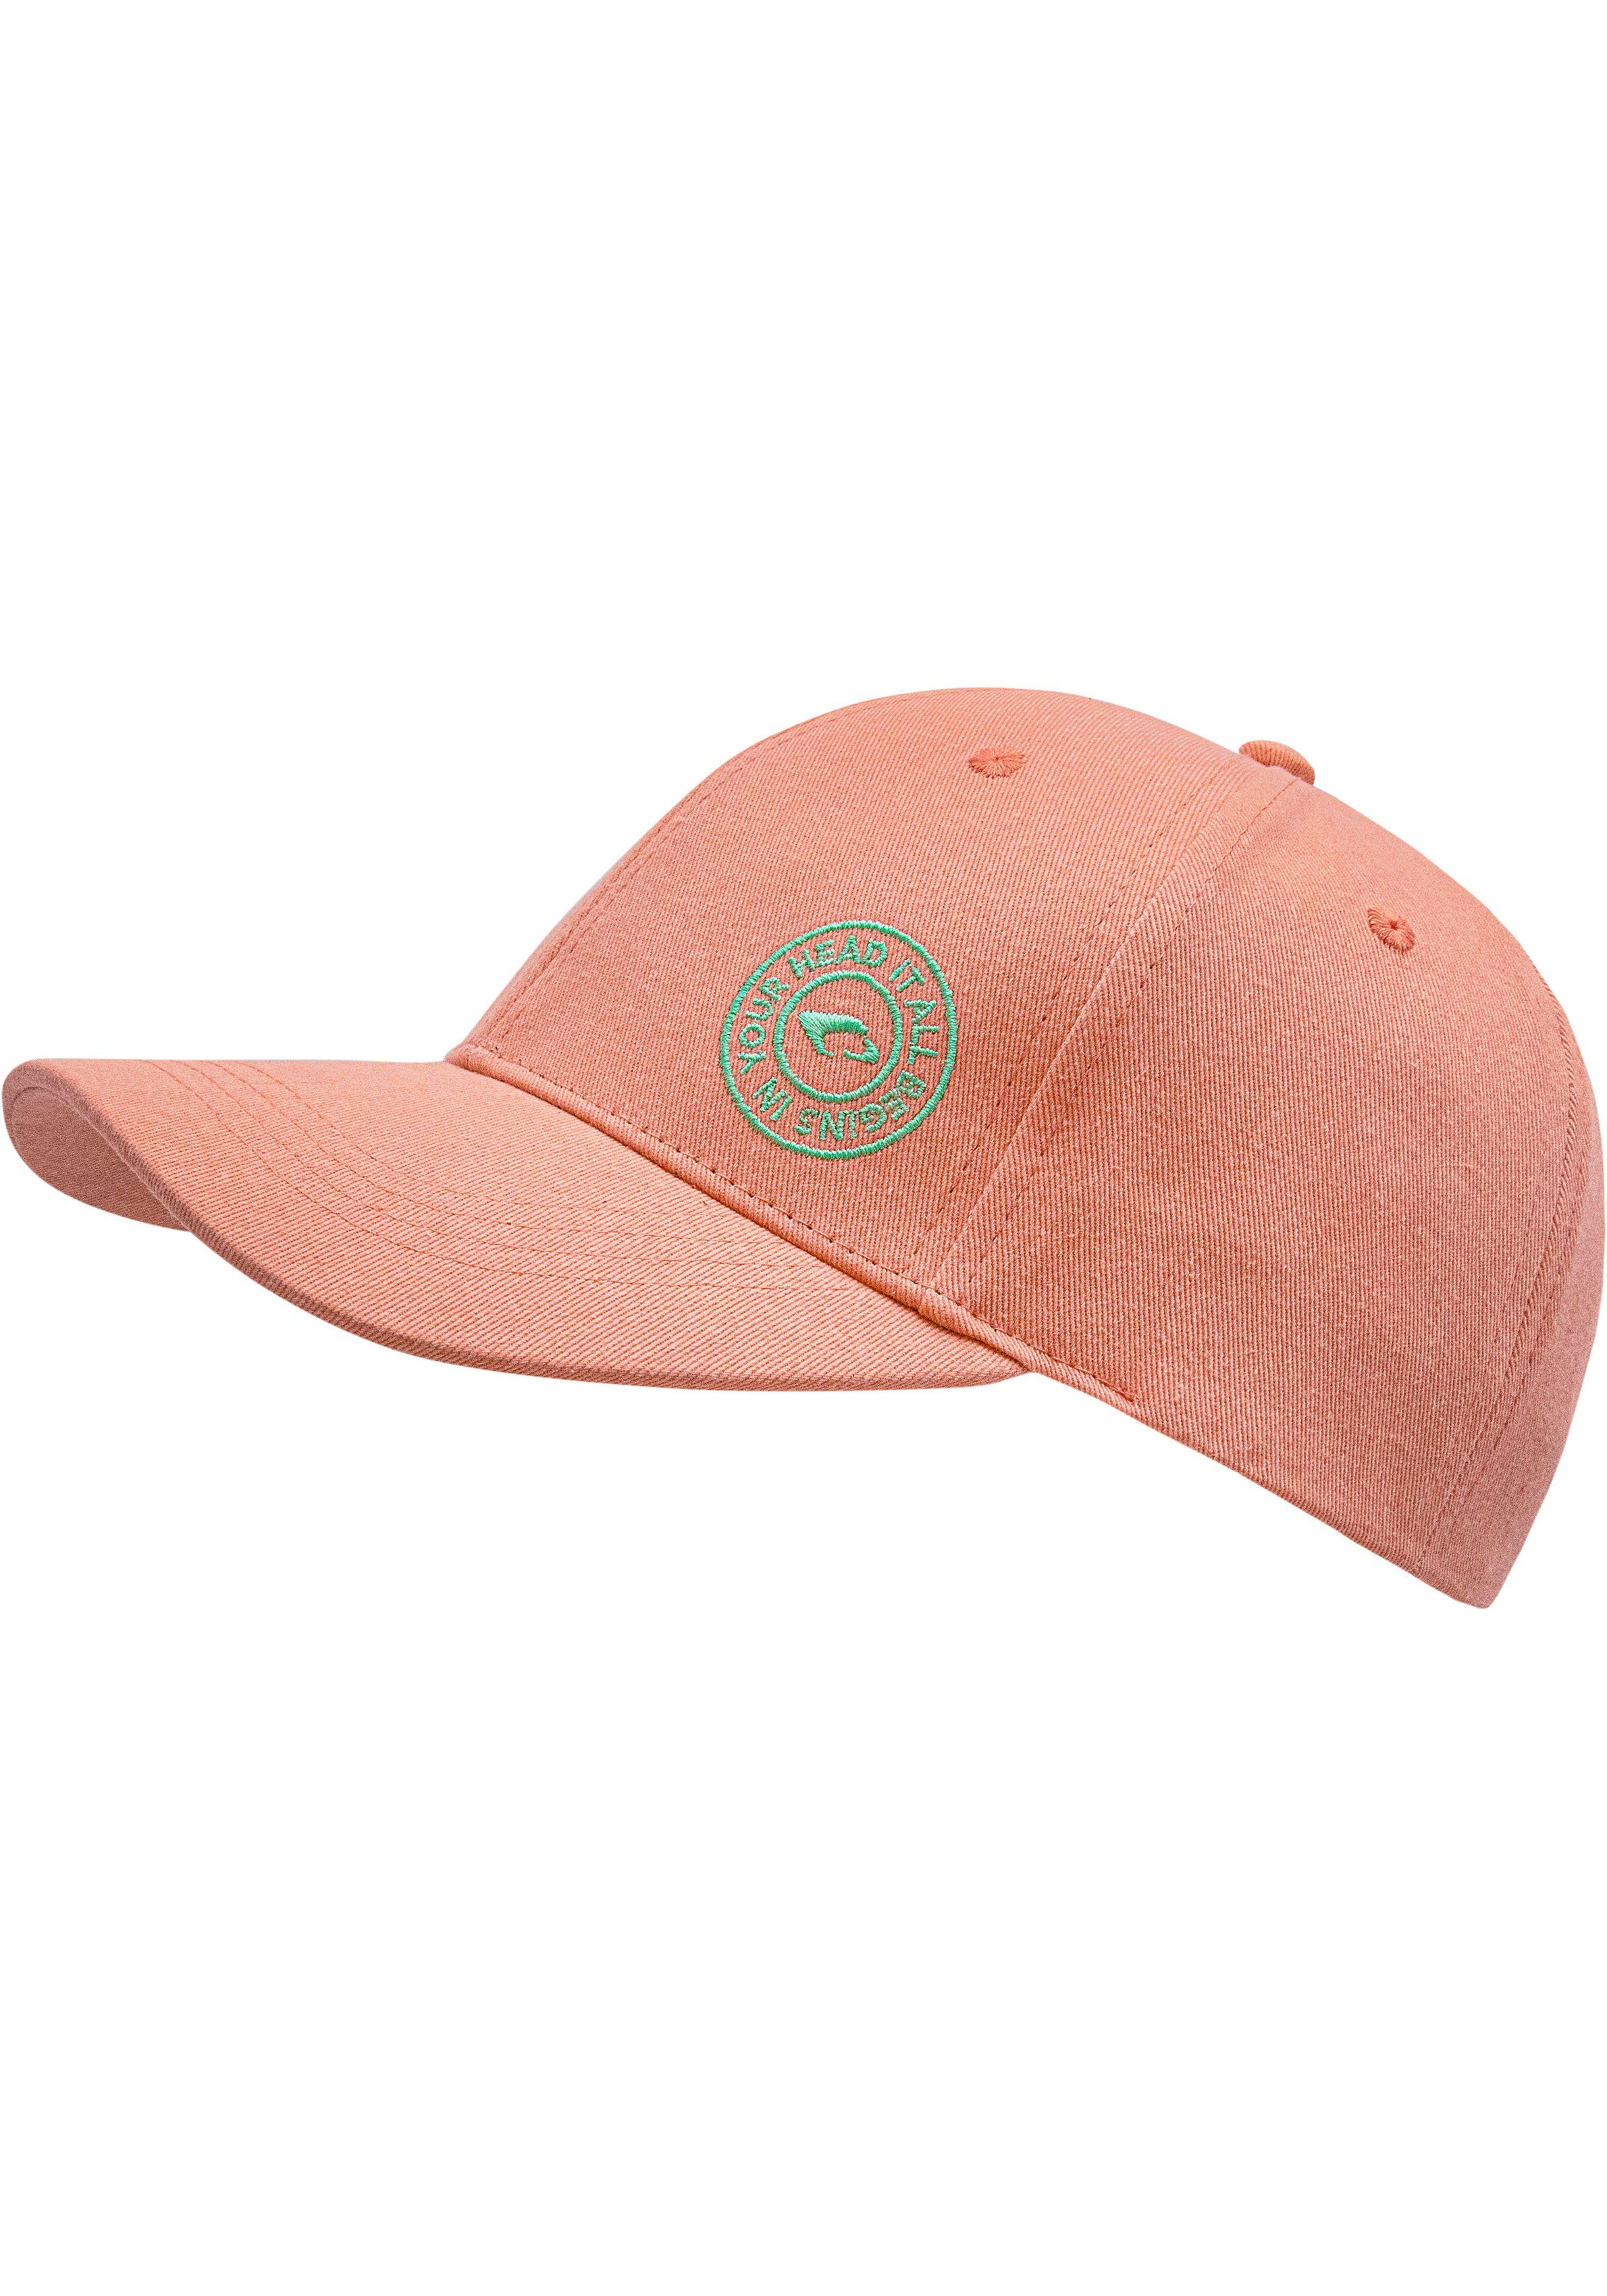 chillouts coral Baseball Arklow Cap Hat